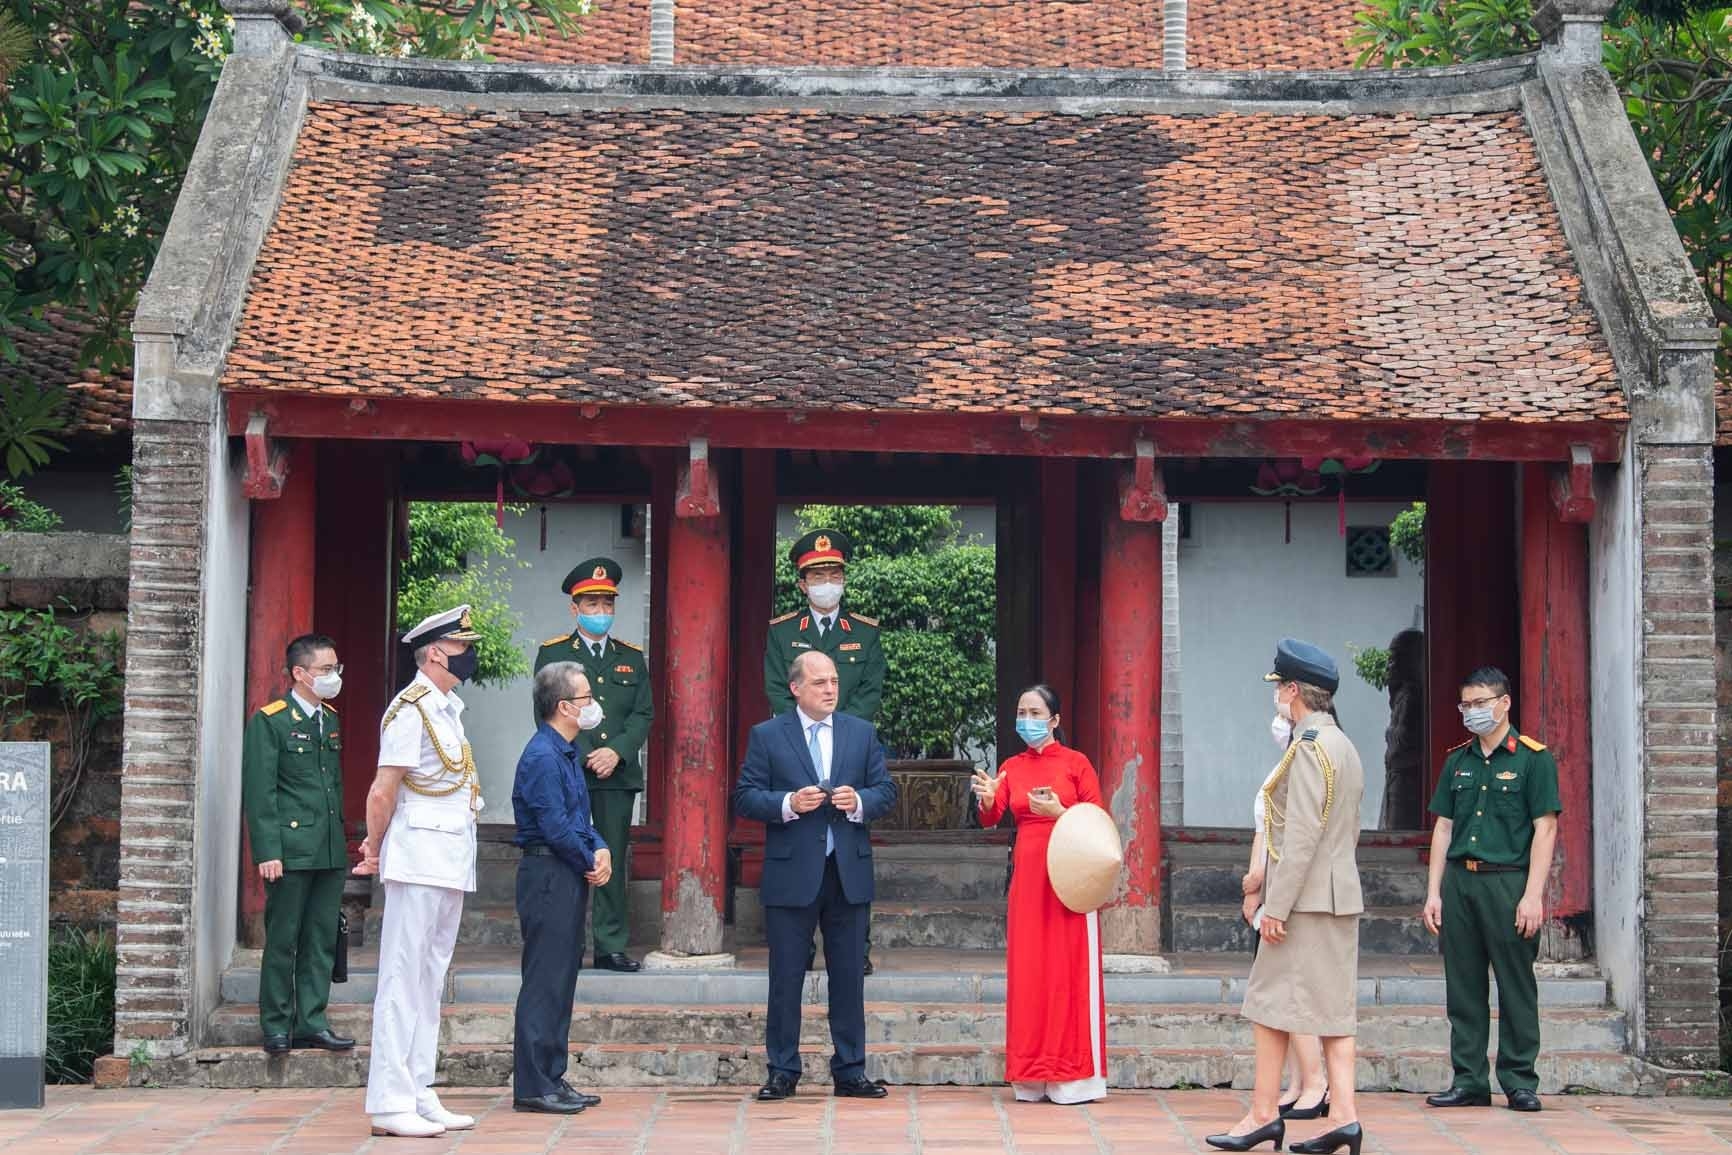 vists the Temple of Literature in Hanoi on Thursday.